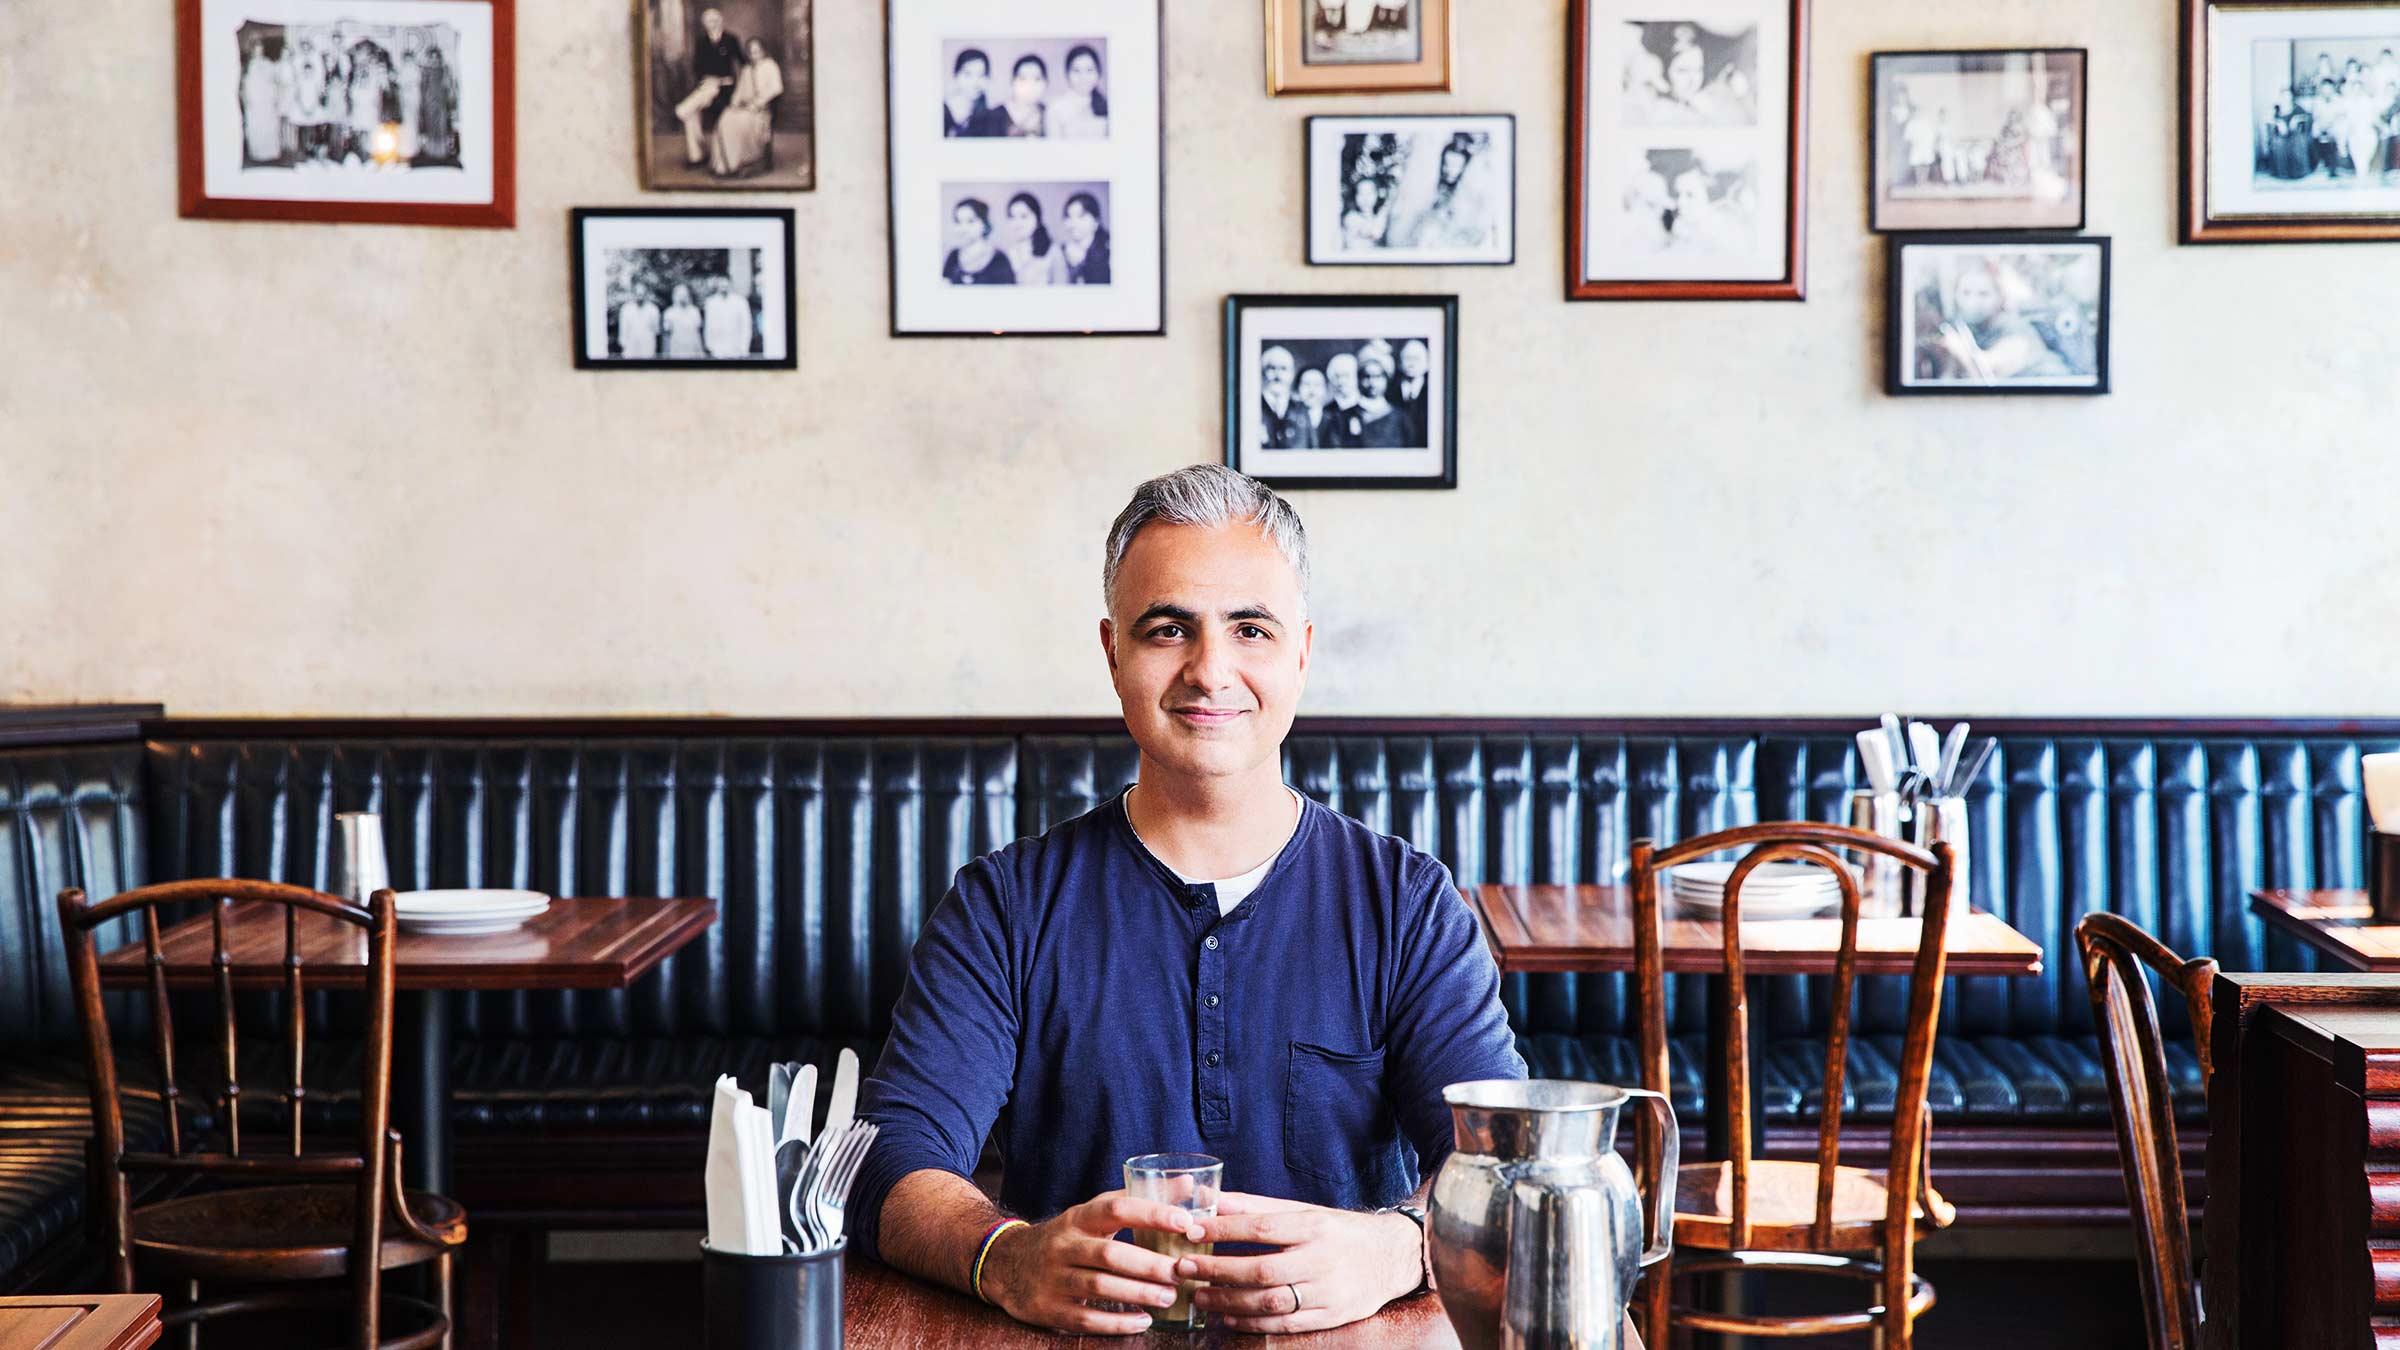 The Dishoom Story How Co Founder Shamil Thakrar Built The Much Loved Group Through Culture And Authenticity People Profiles Travel Leisure Weekly Column Executive Search The Mbs Group Dishoom a fost lansat in toata lumea la 29 iulie 2016. how co founder shamil thakrar built the